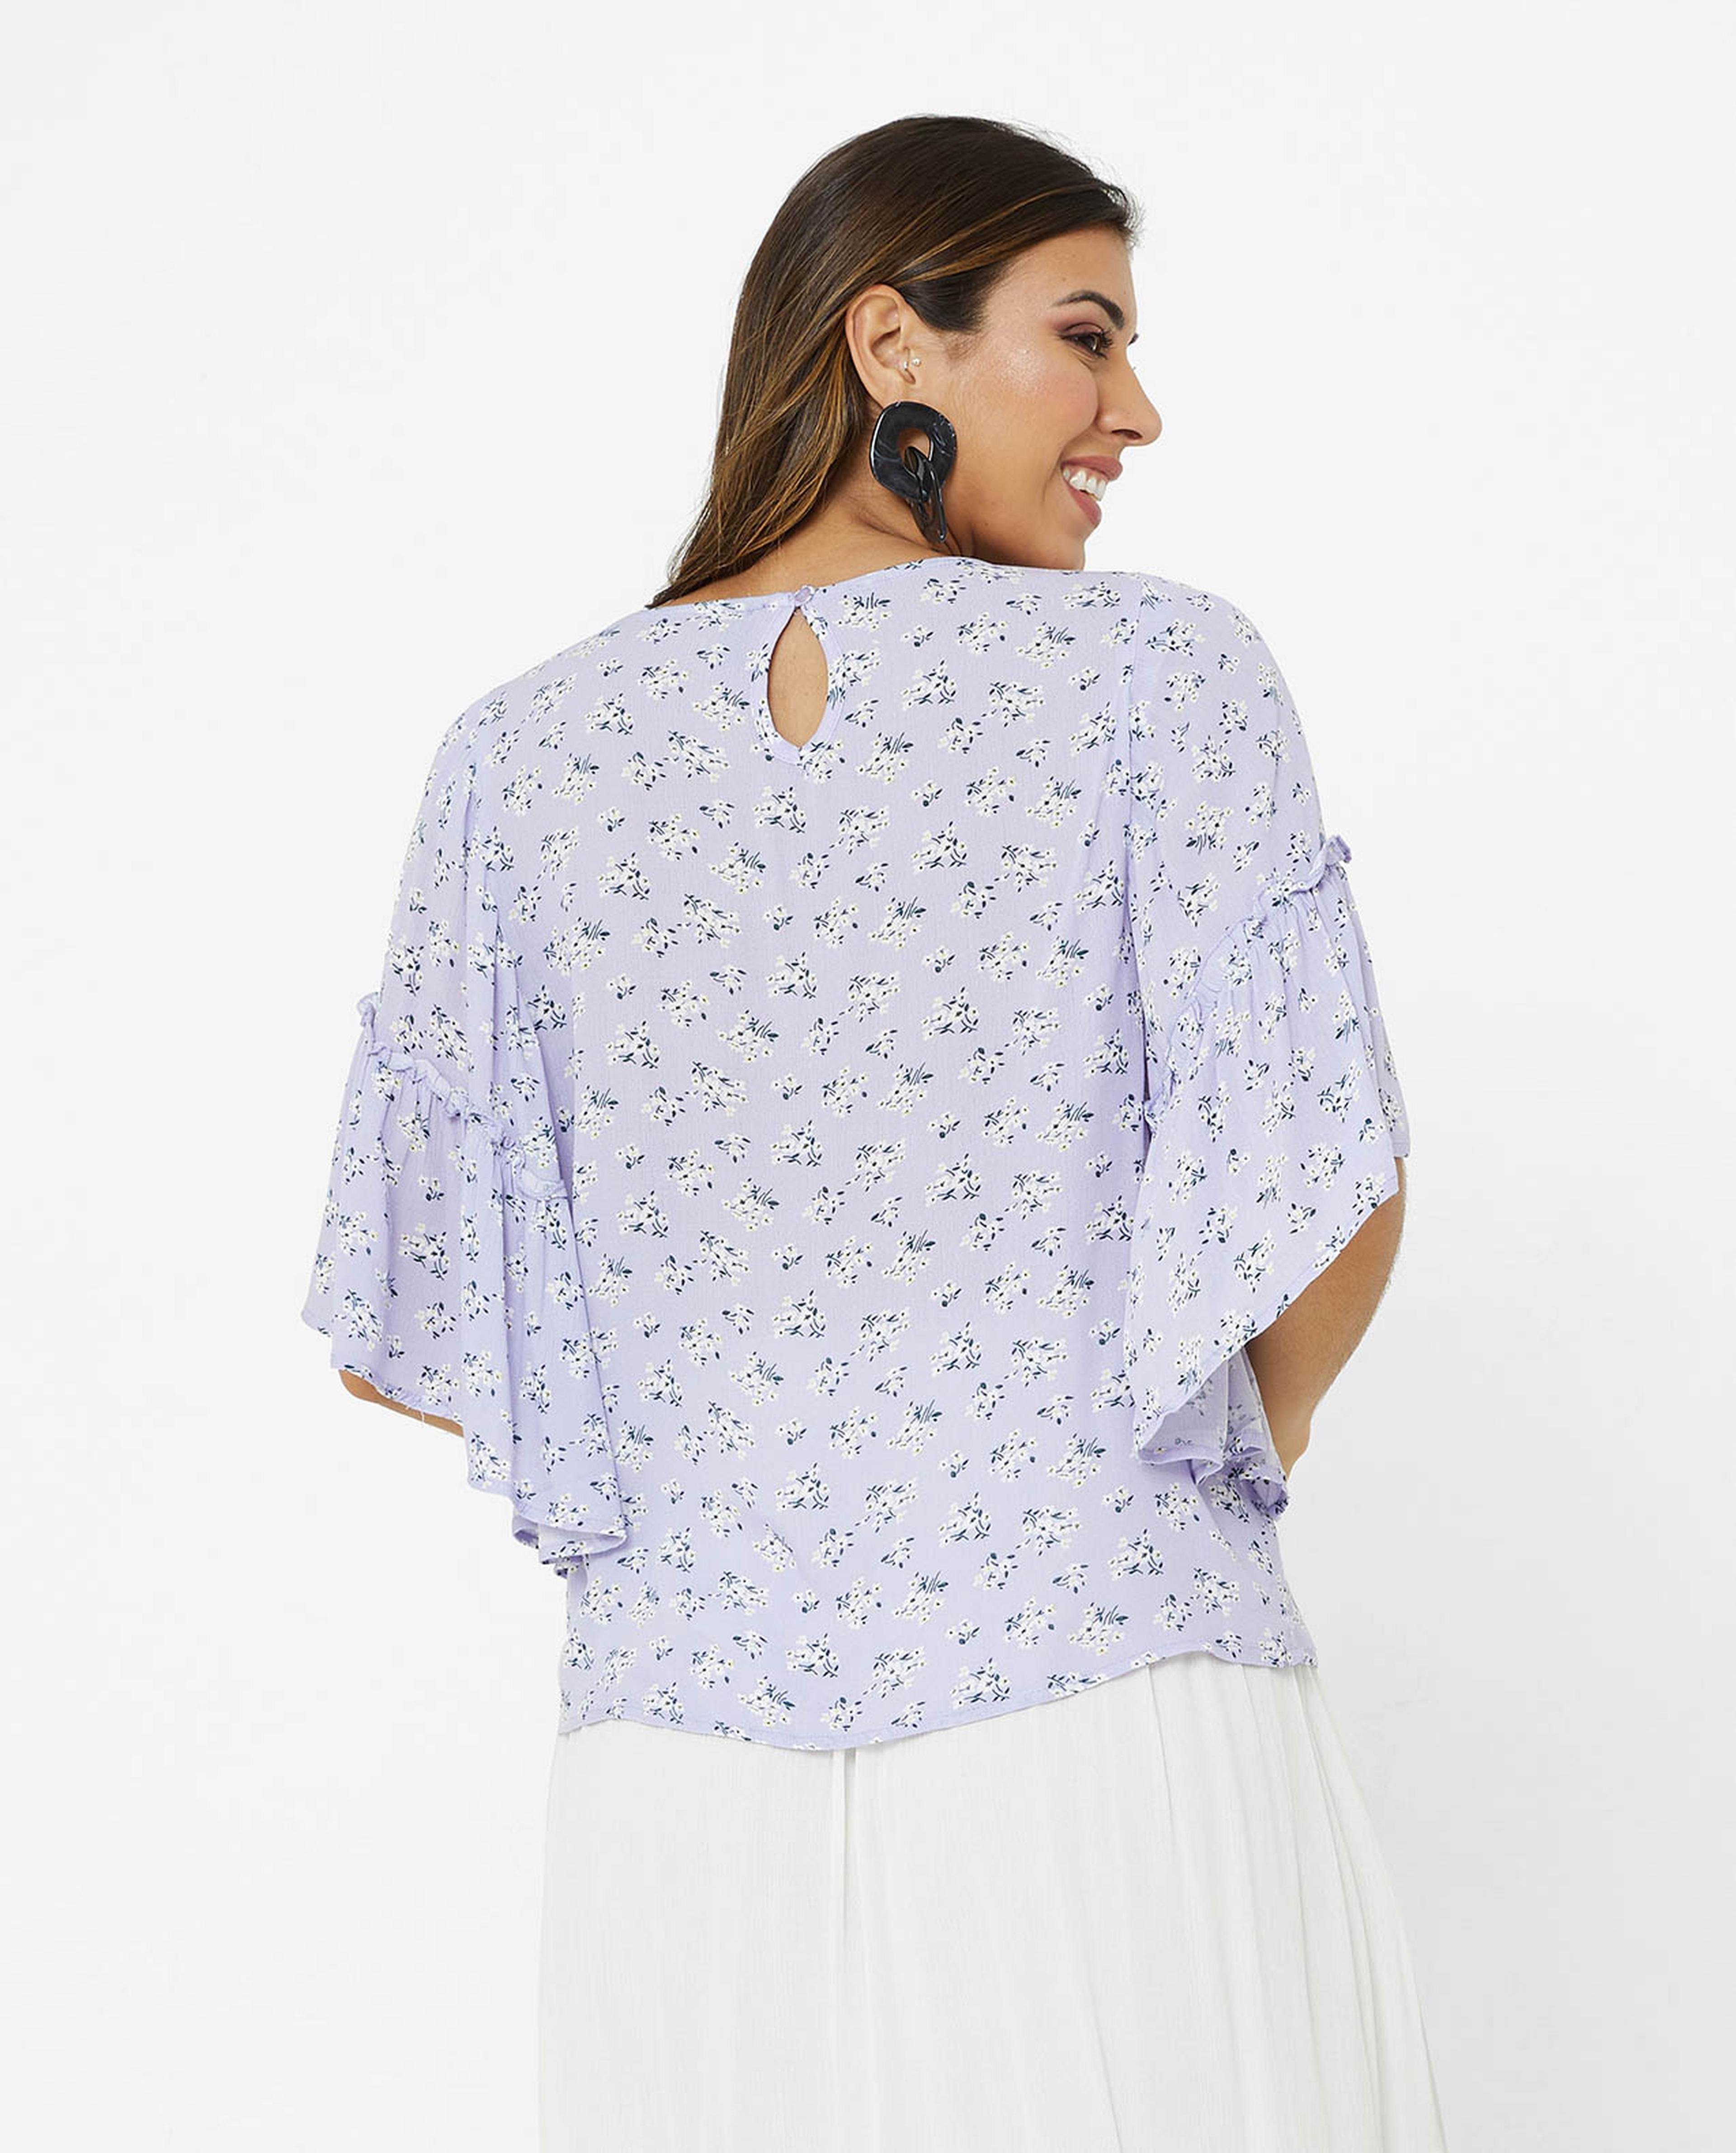 Floral Printed Top with Boat Neck and Flared Sleeves